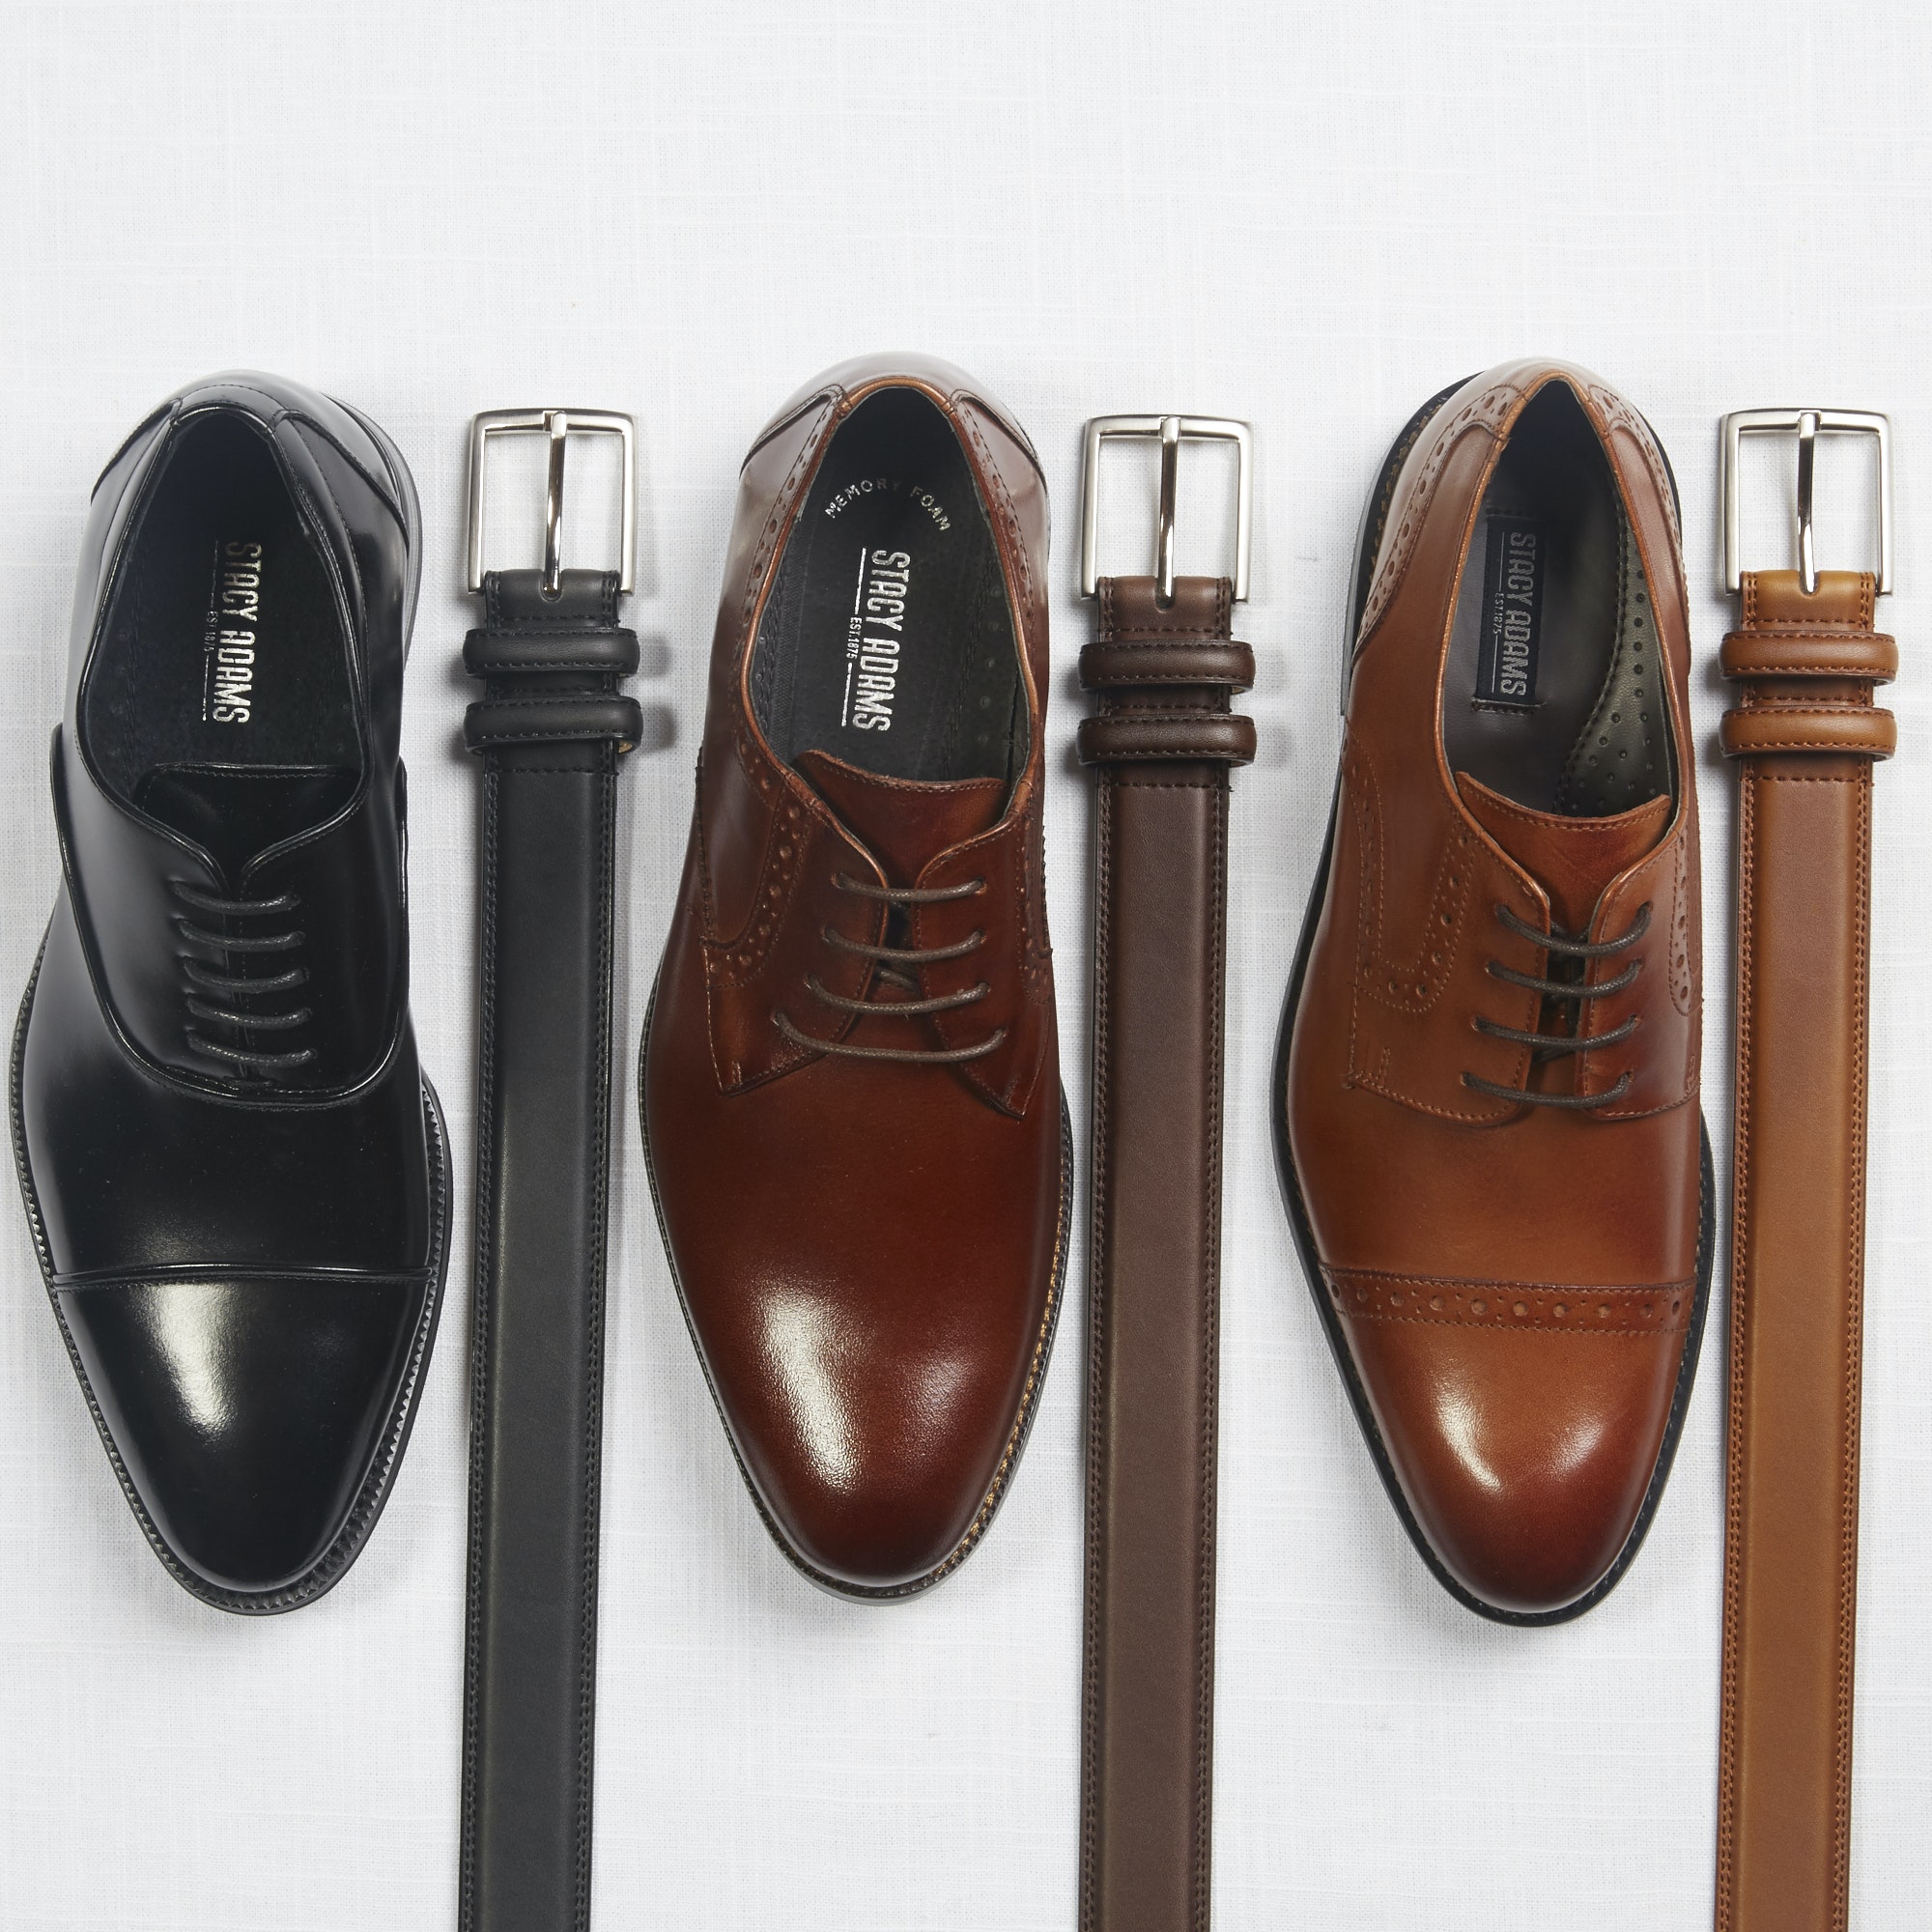 Brown or Black Shoes with Navy Suit - KEMBEO